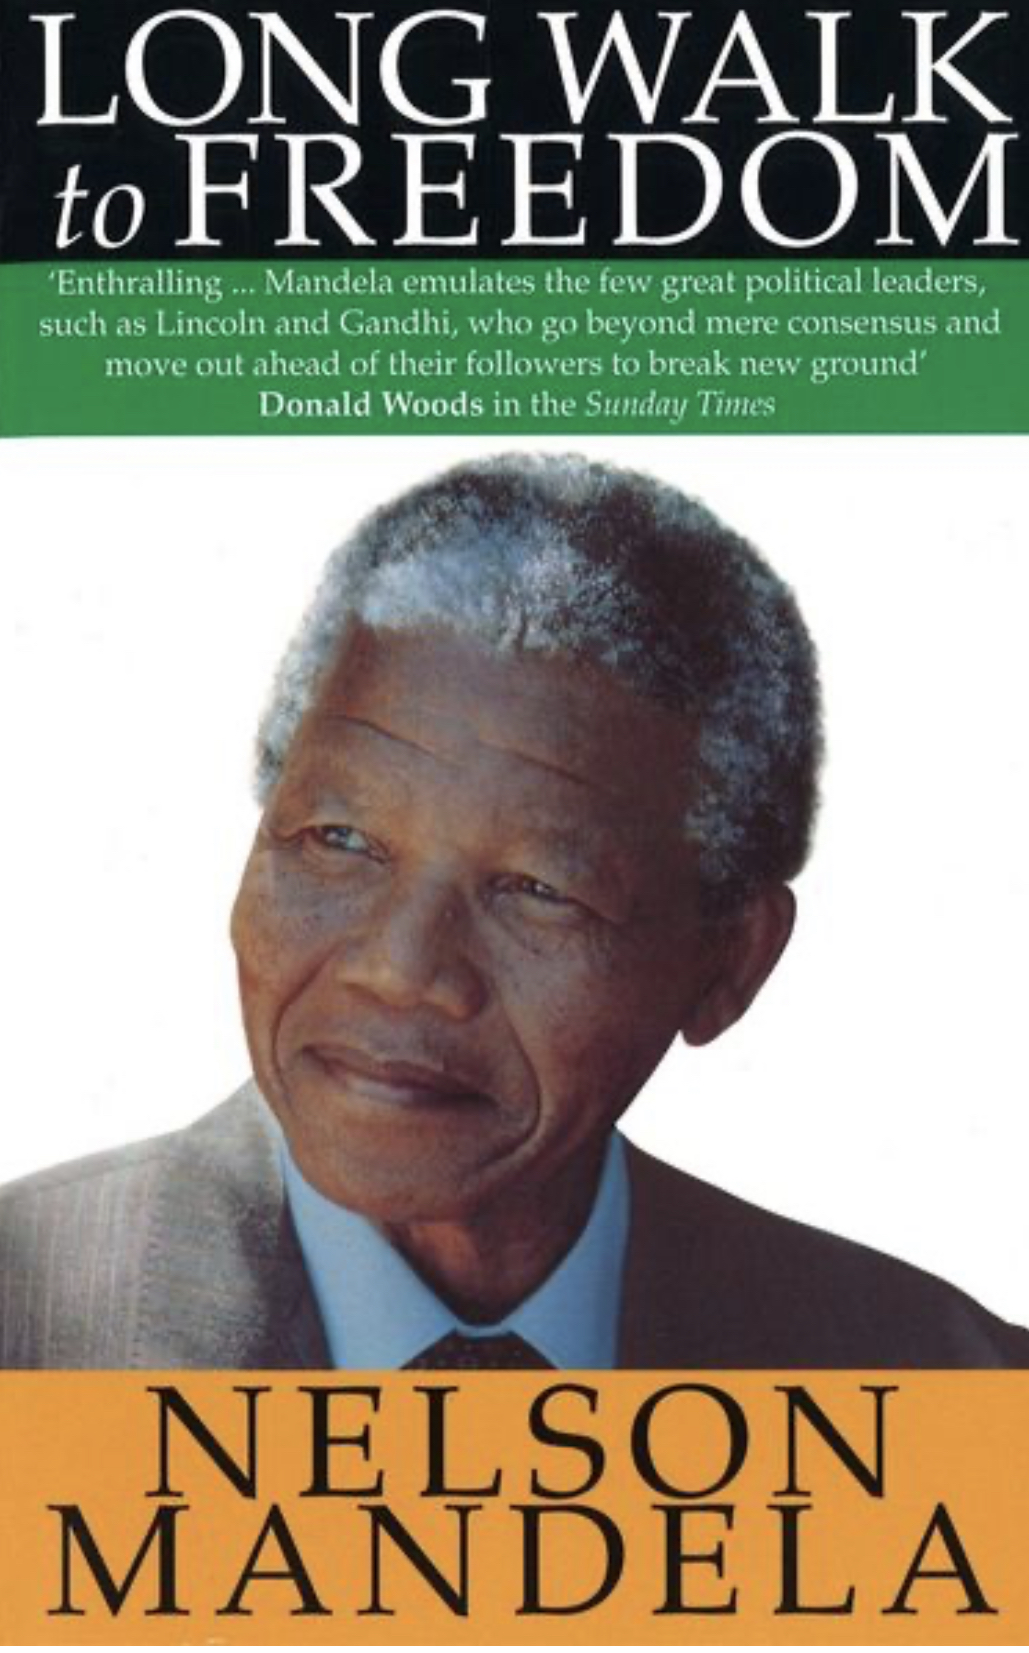 10 Top Books about South Africa - Long Walk to Freedom, by Nelson Mandela